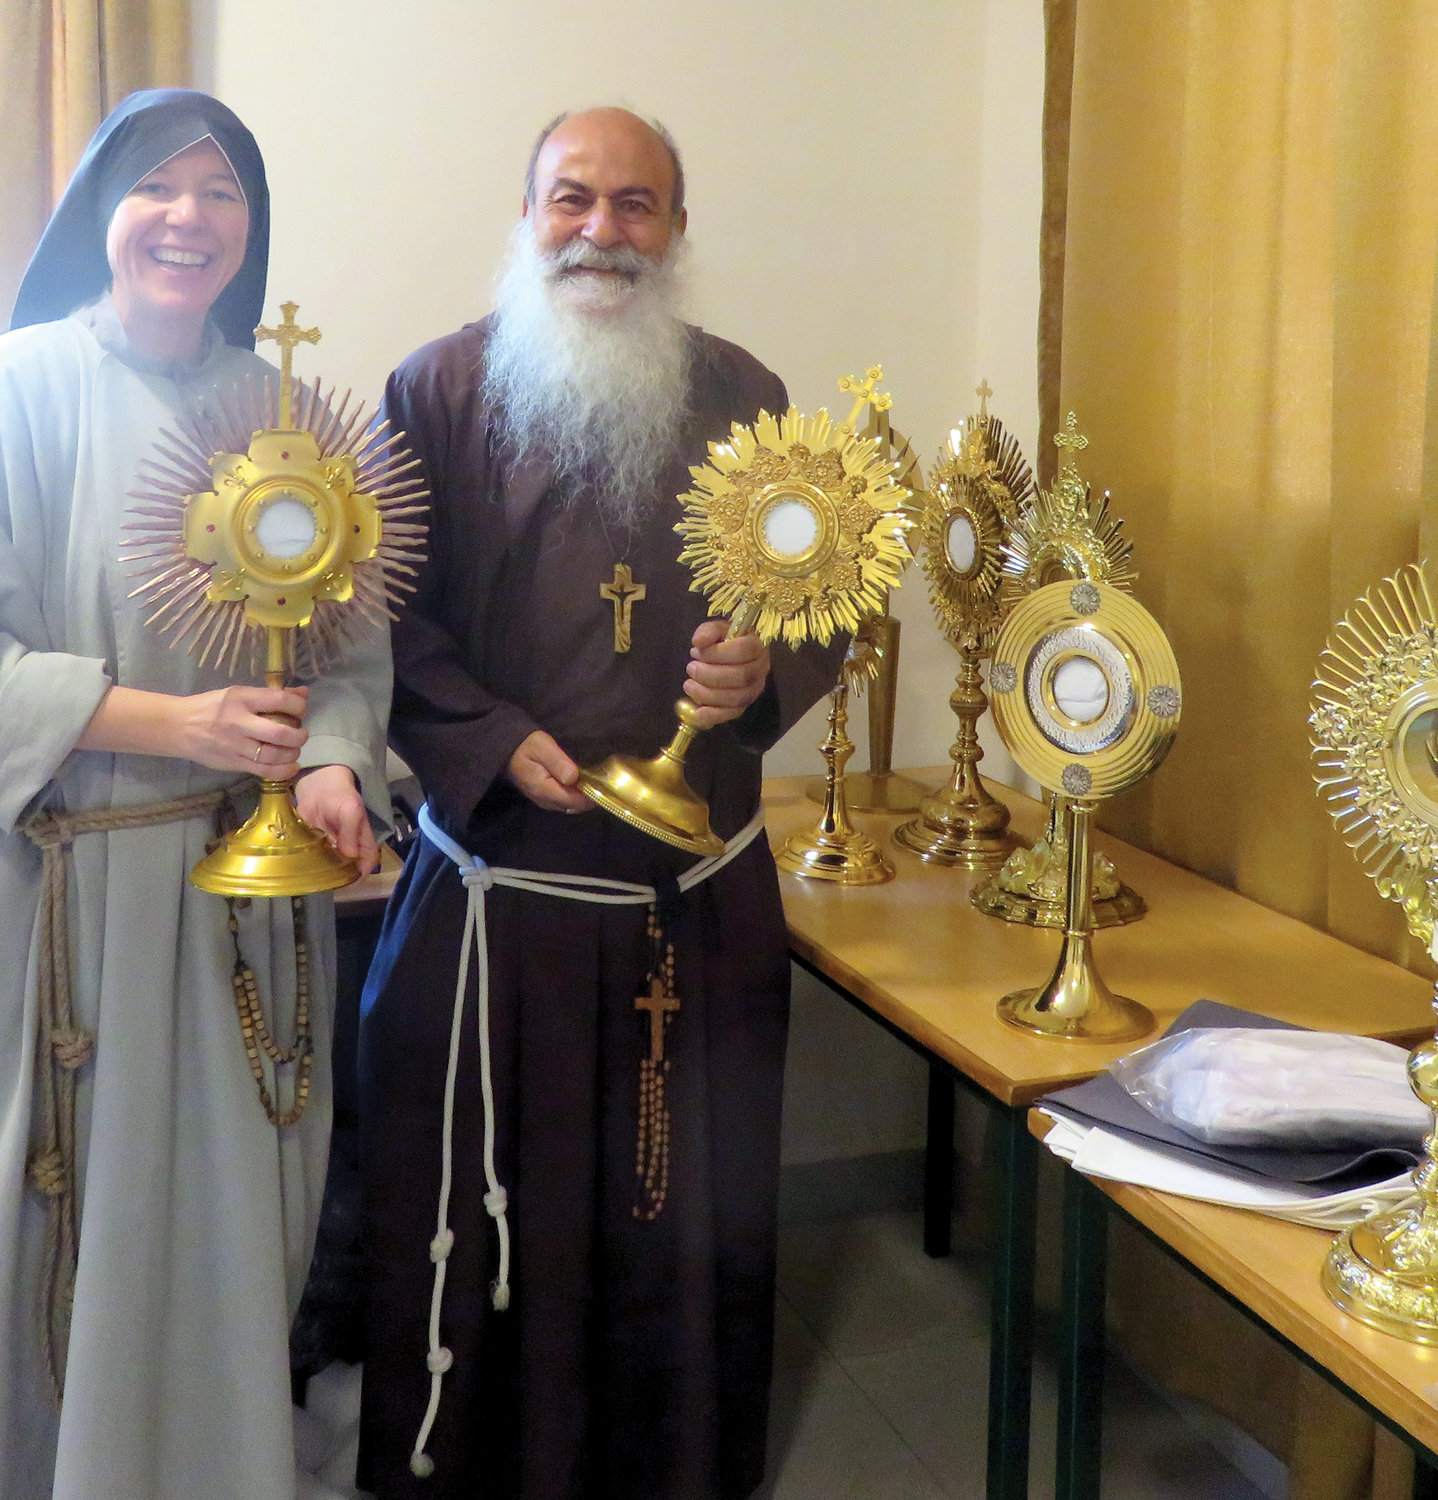 Mother Clare Matthias, C.F.R., community servant (superior general) of the Franciscan Sisters of the Renewal, and Bishop Angelo Pagano, O.F.M. Cap., Vicar Apostolic of Harar, hold monstrances delivered from New York to the Apostolic Vicariate of Harar in Ethiopia.